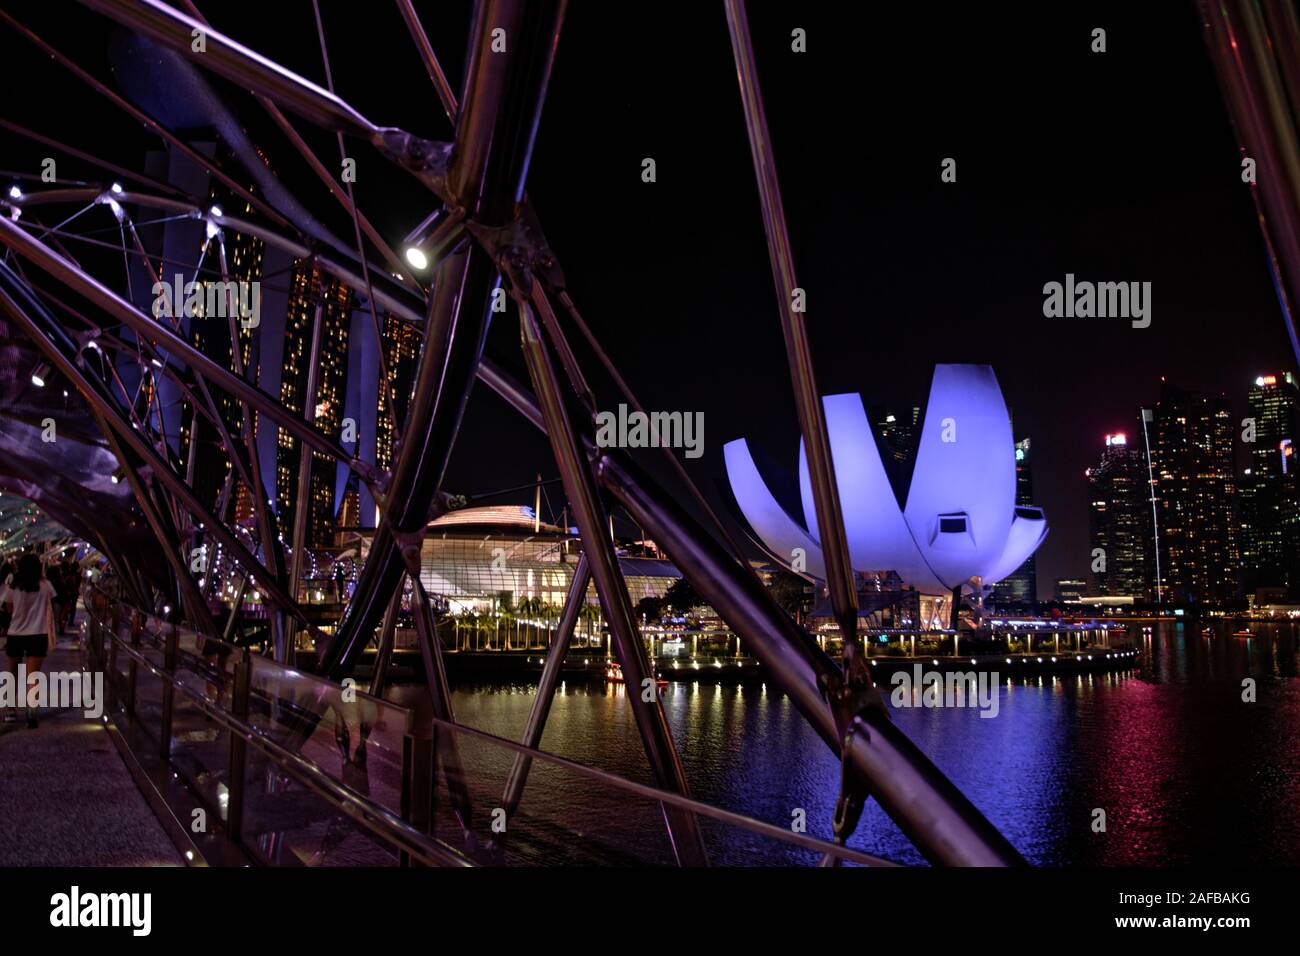 Panorama of Marina Bay at night, from bridge viewpoint to lotos flower shape building Stock Photo